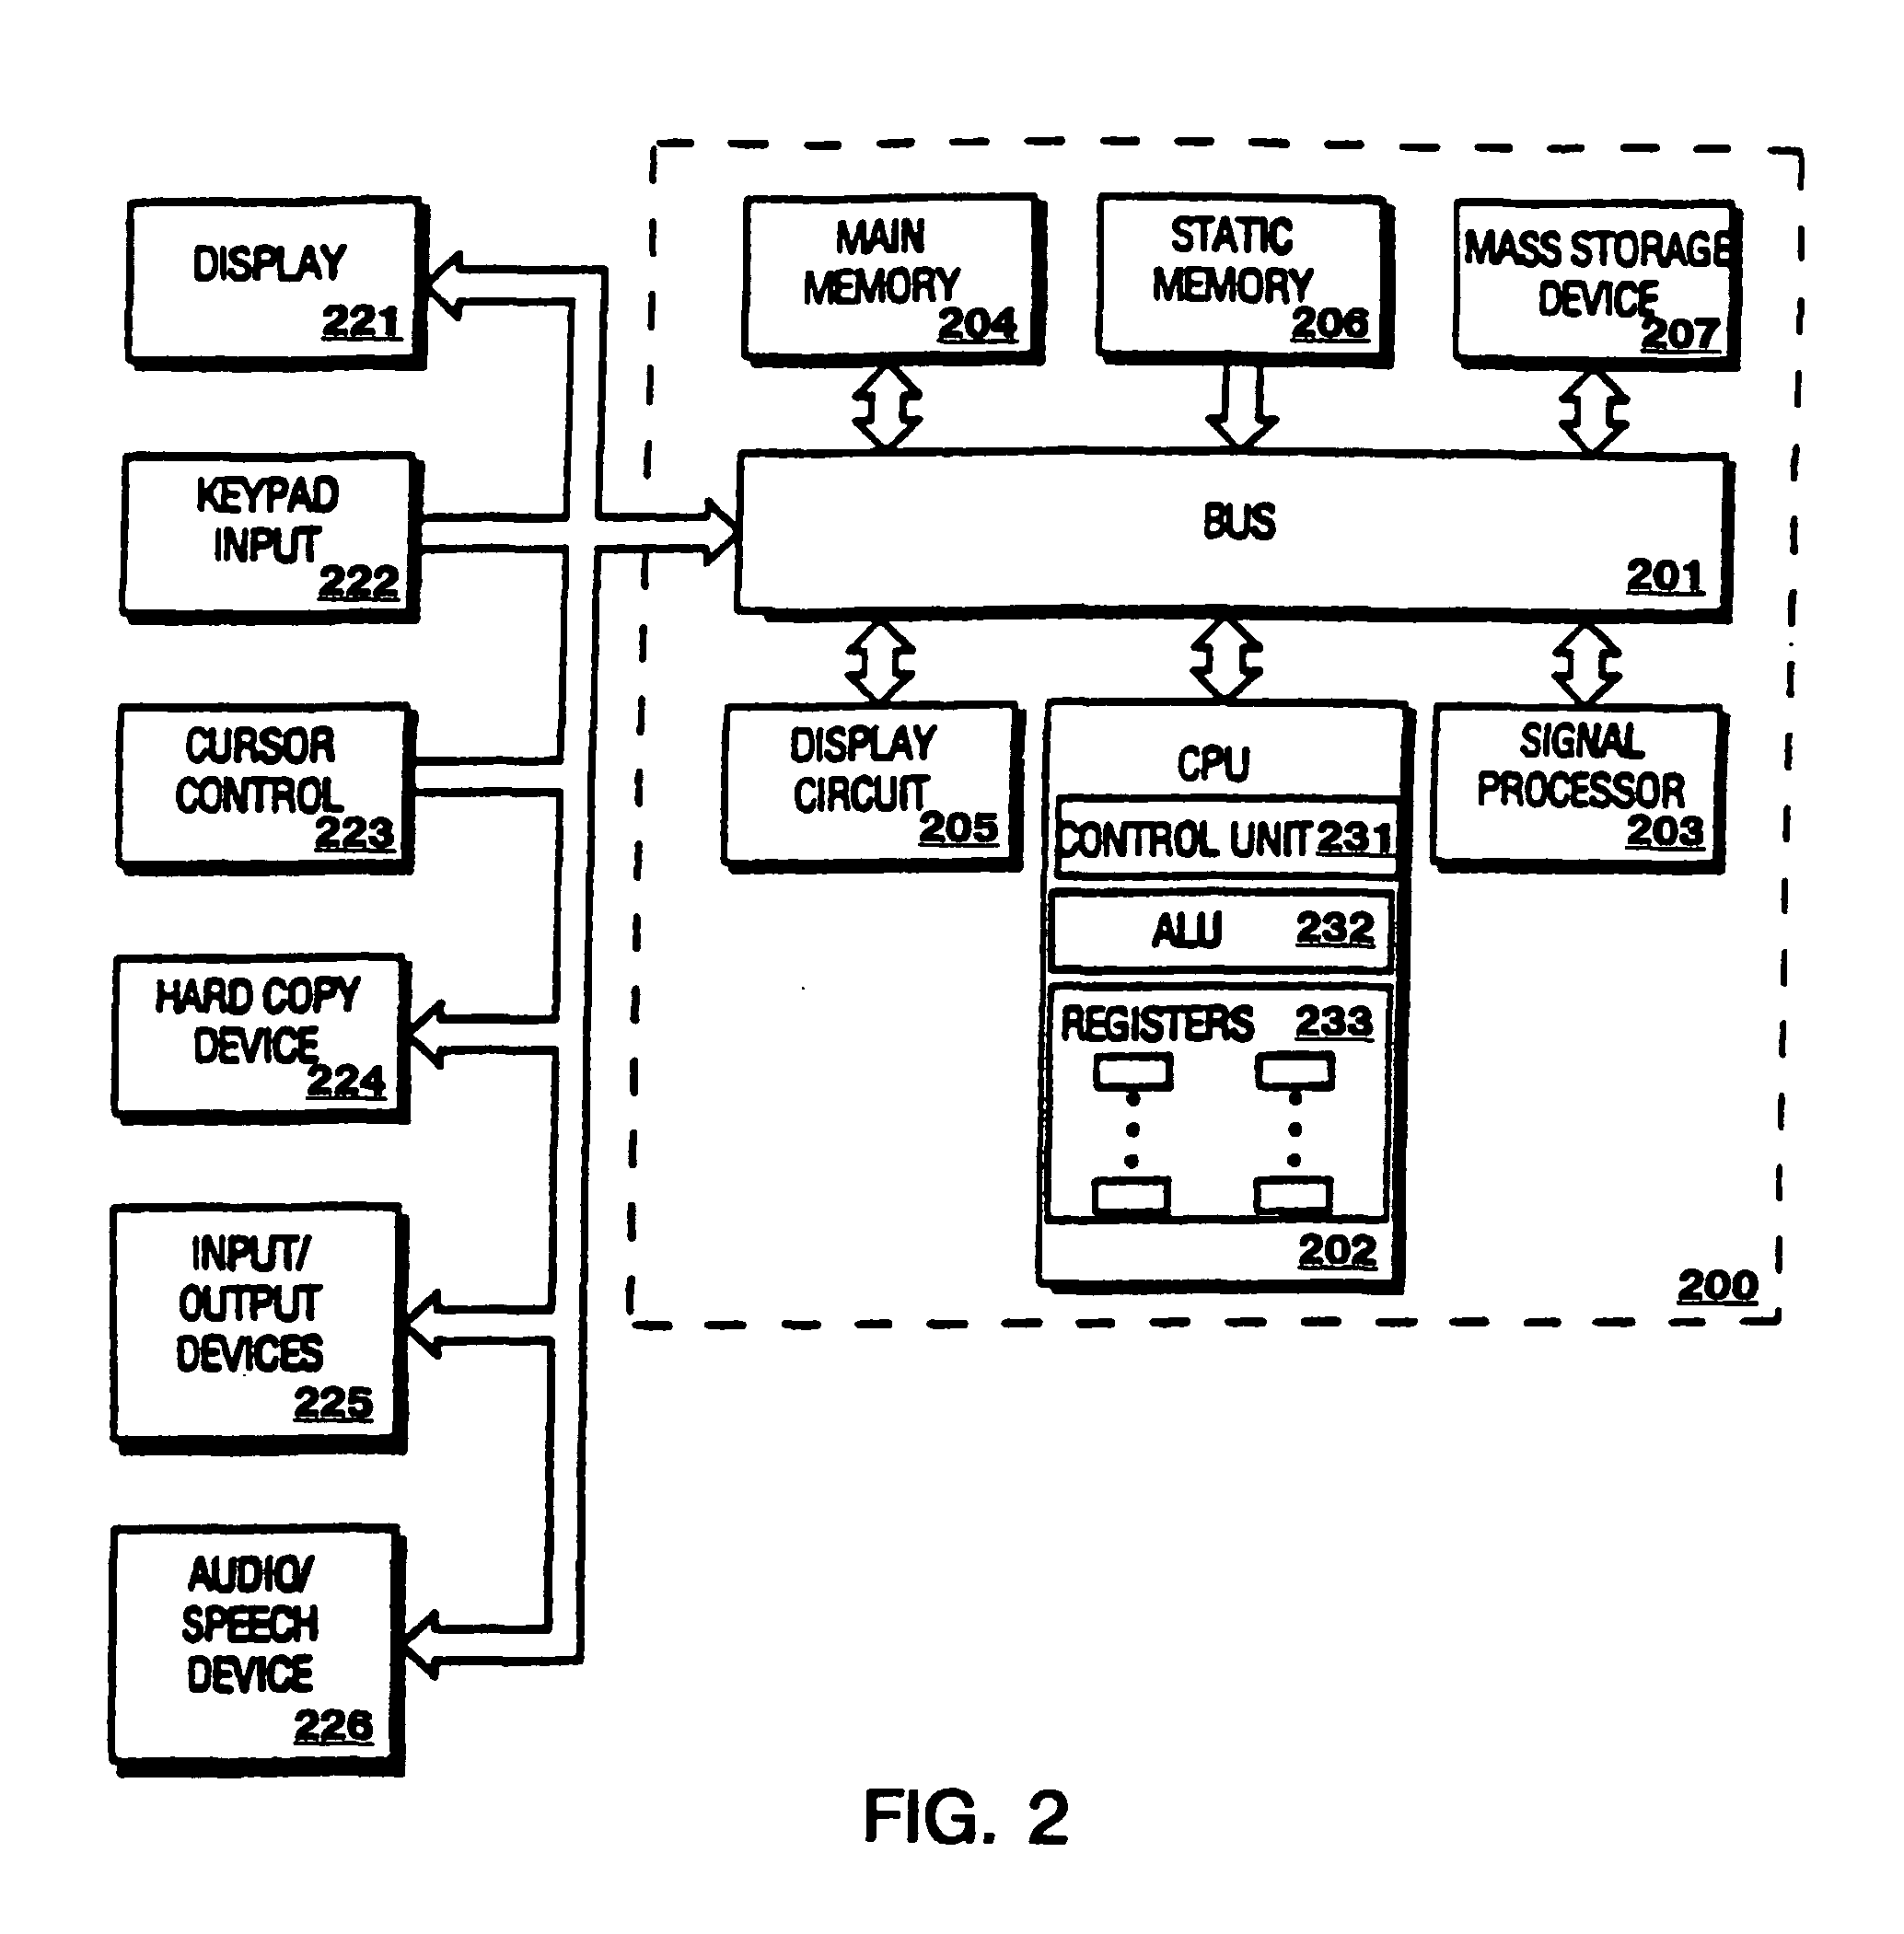 Method and apparatus to provide a hierarchical index for a language model data structure